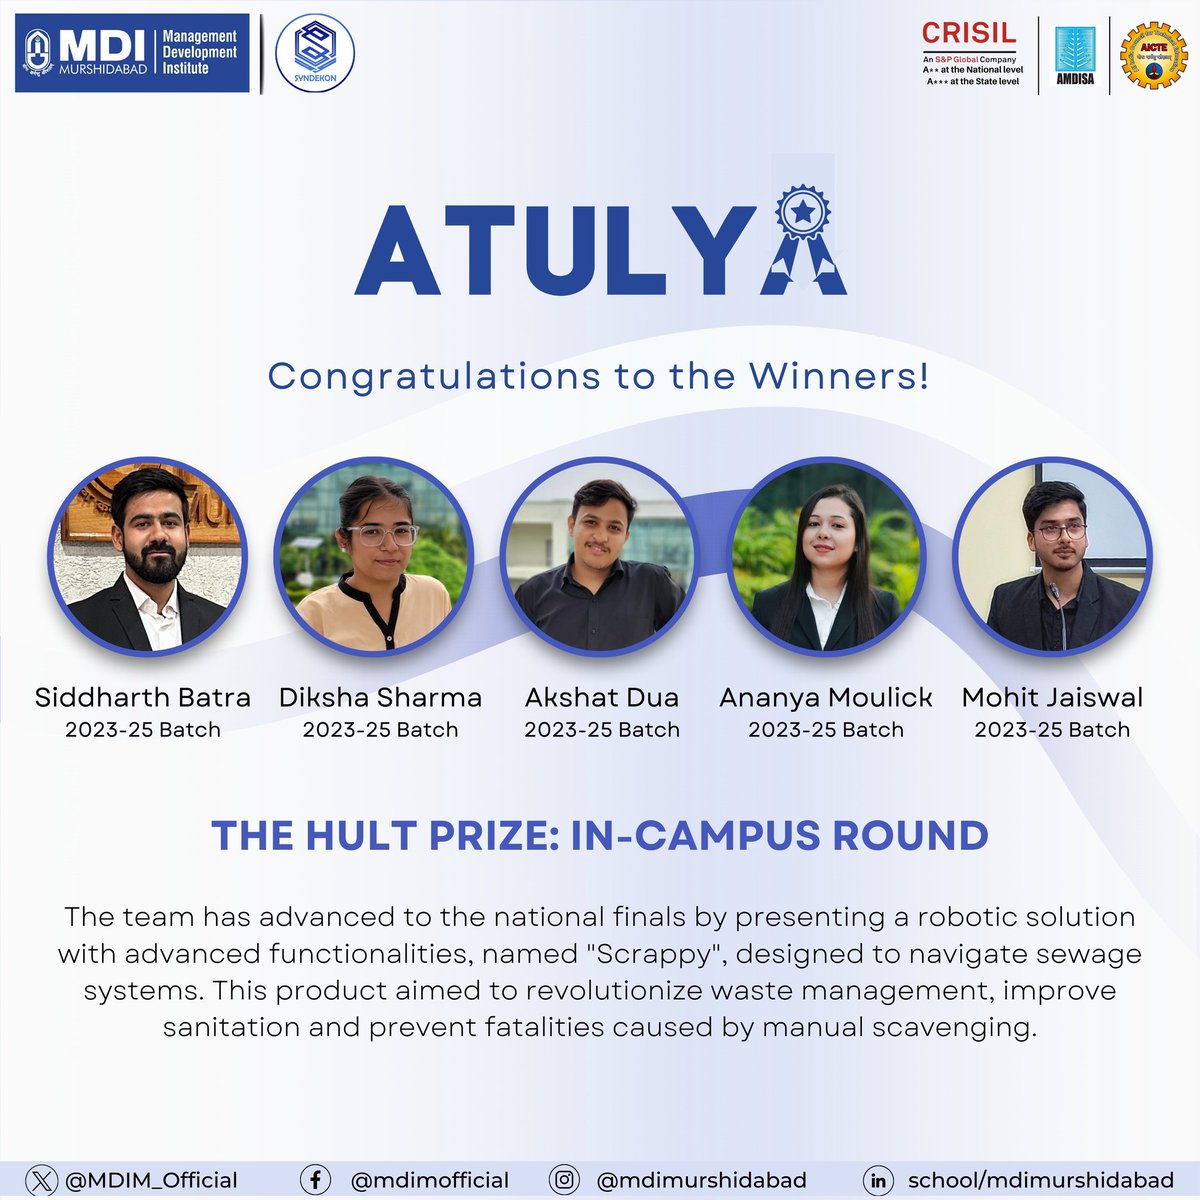 #MDIM proudly announces that Mohit Jaiswal, Ananya Moulick, Diksha Sharma, Akshat Dua & Siddharth Batra have emerged victorious in the incampus round of the #HULT Prize, partnered with the United Nations, a global platform the UN Sustainable Development Goals. #MDI #MBA